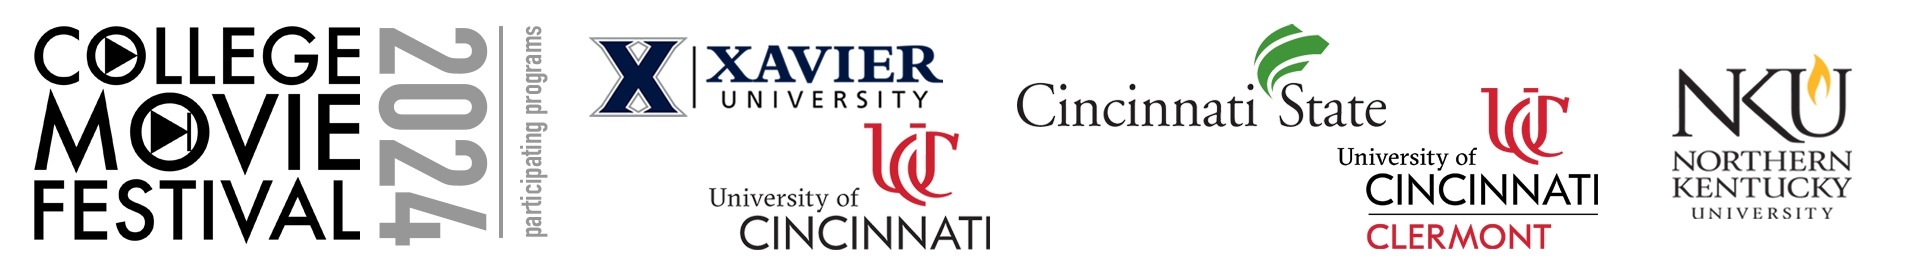 CMF participating college logos